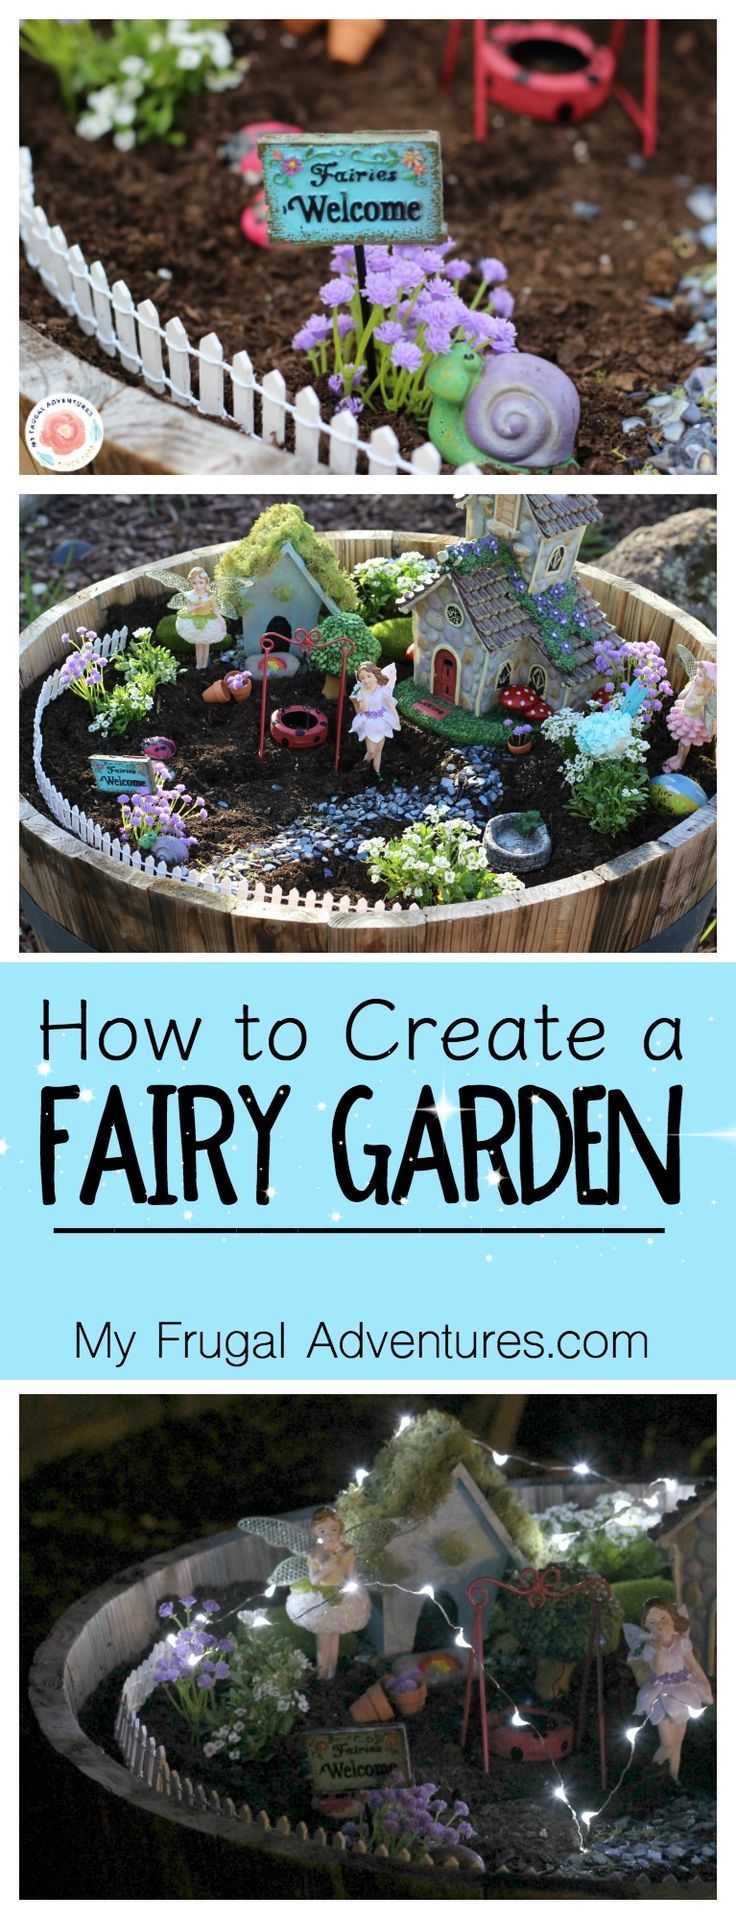 How to Make a Fairy Garden {for Indoor or Outdoor